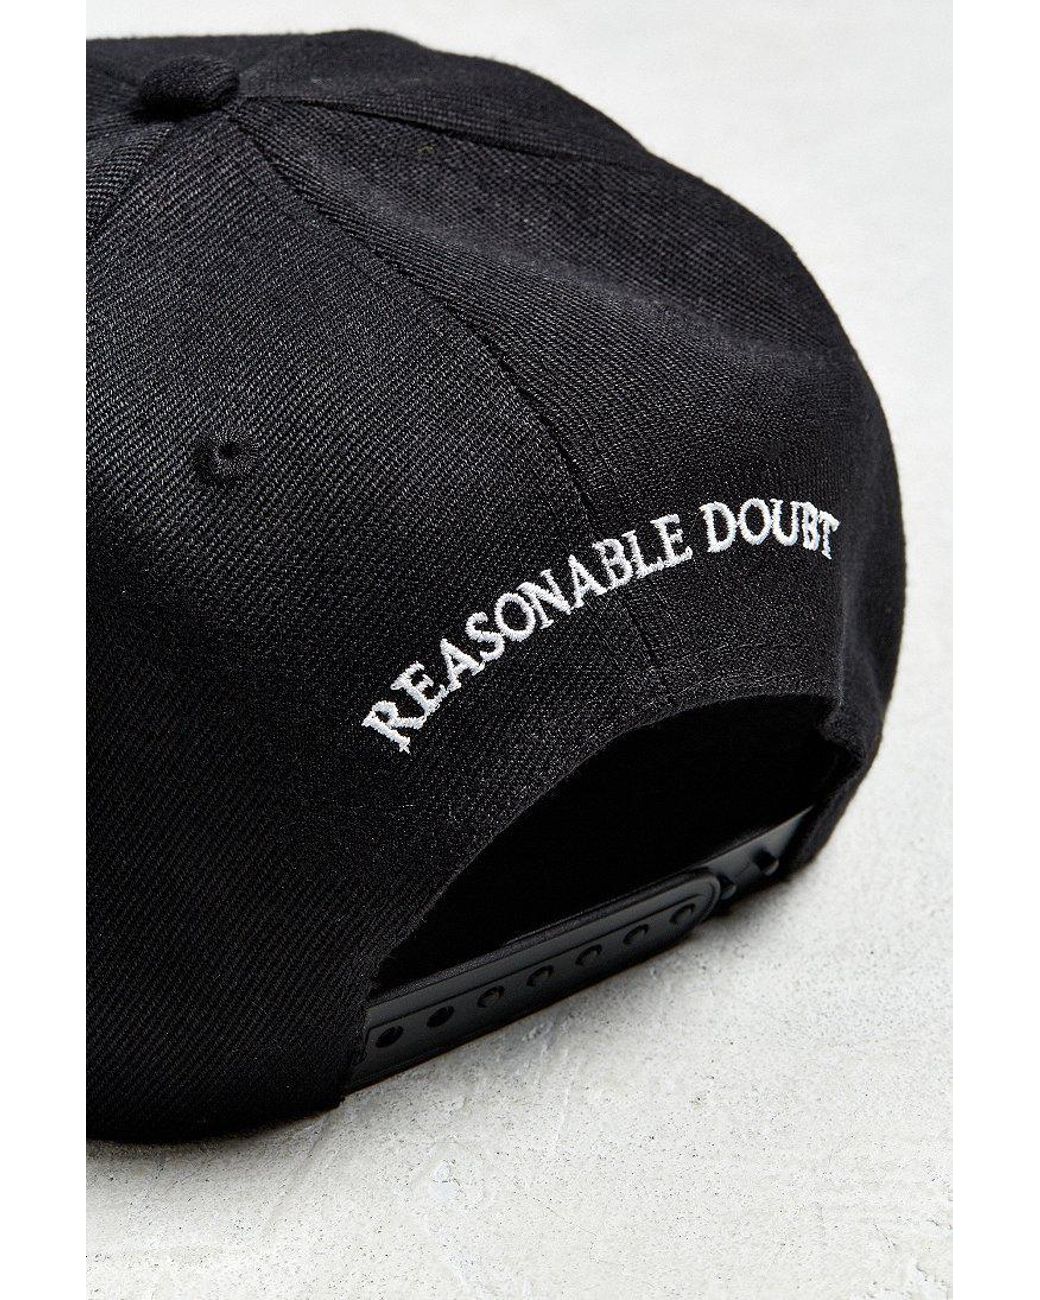 Urban Outfitters Jay-z Reasonable Doubt Snapback Hat in Black for